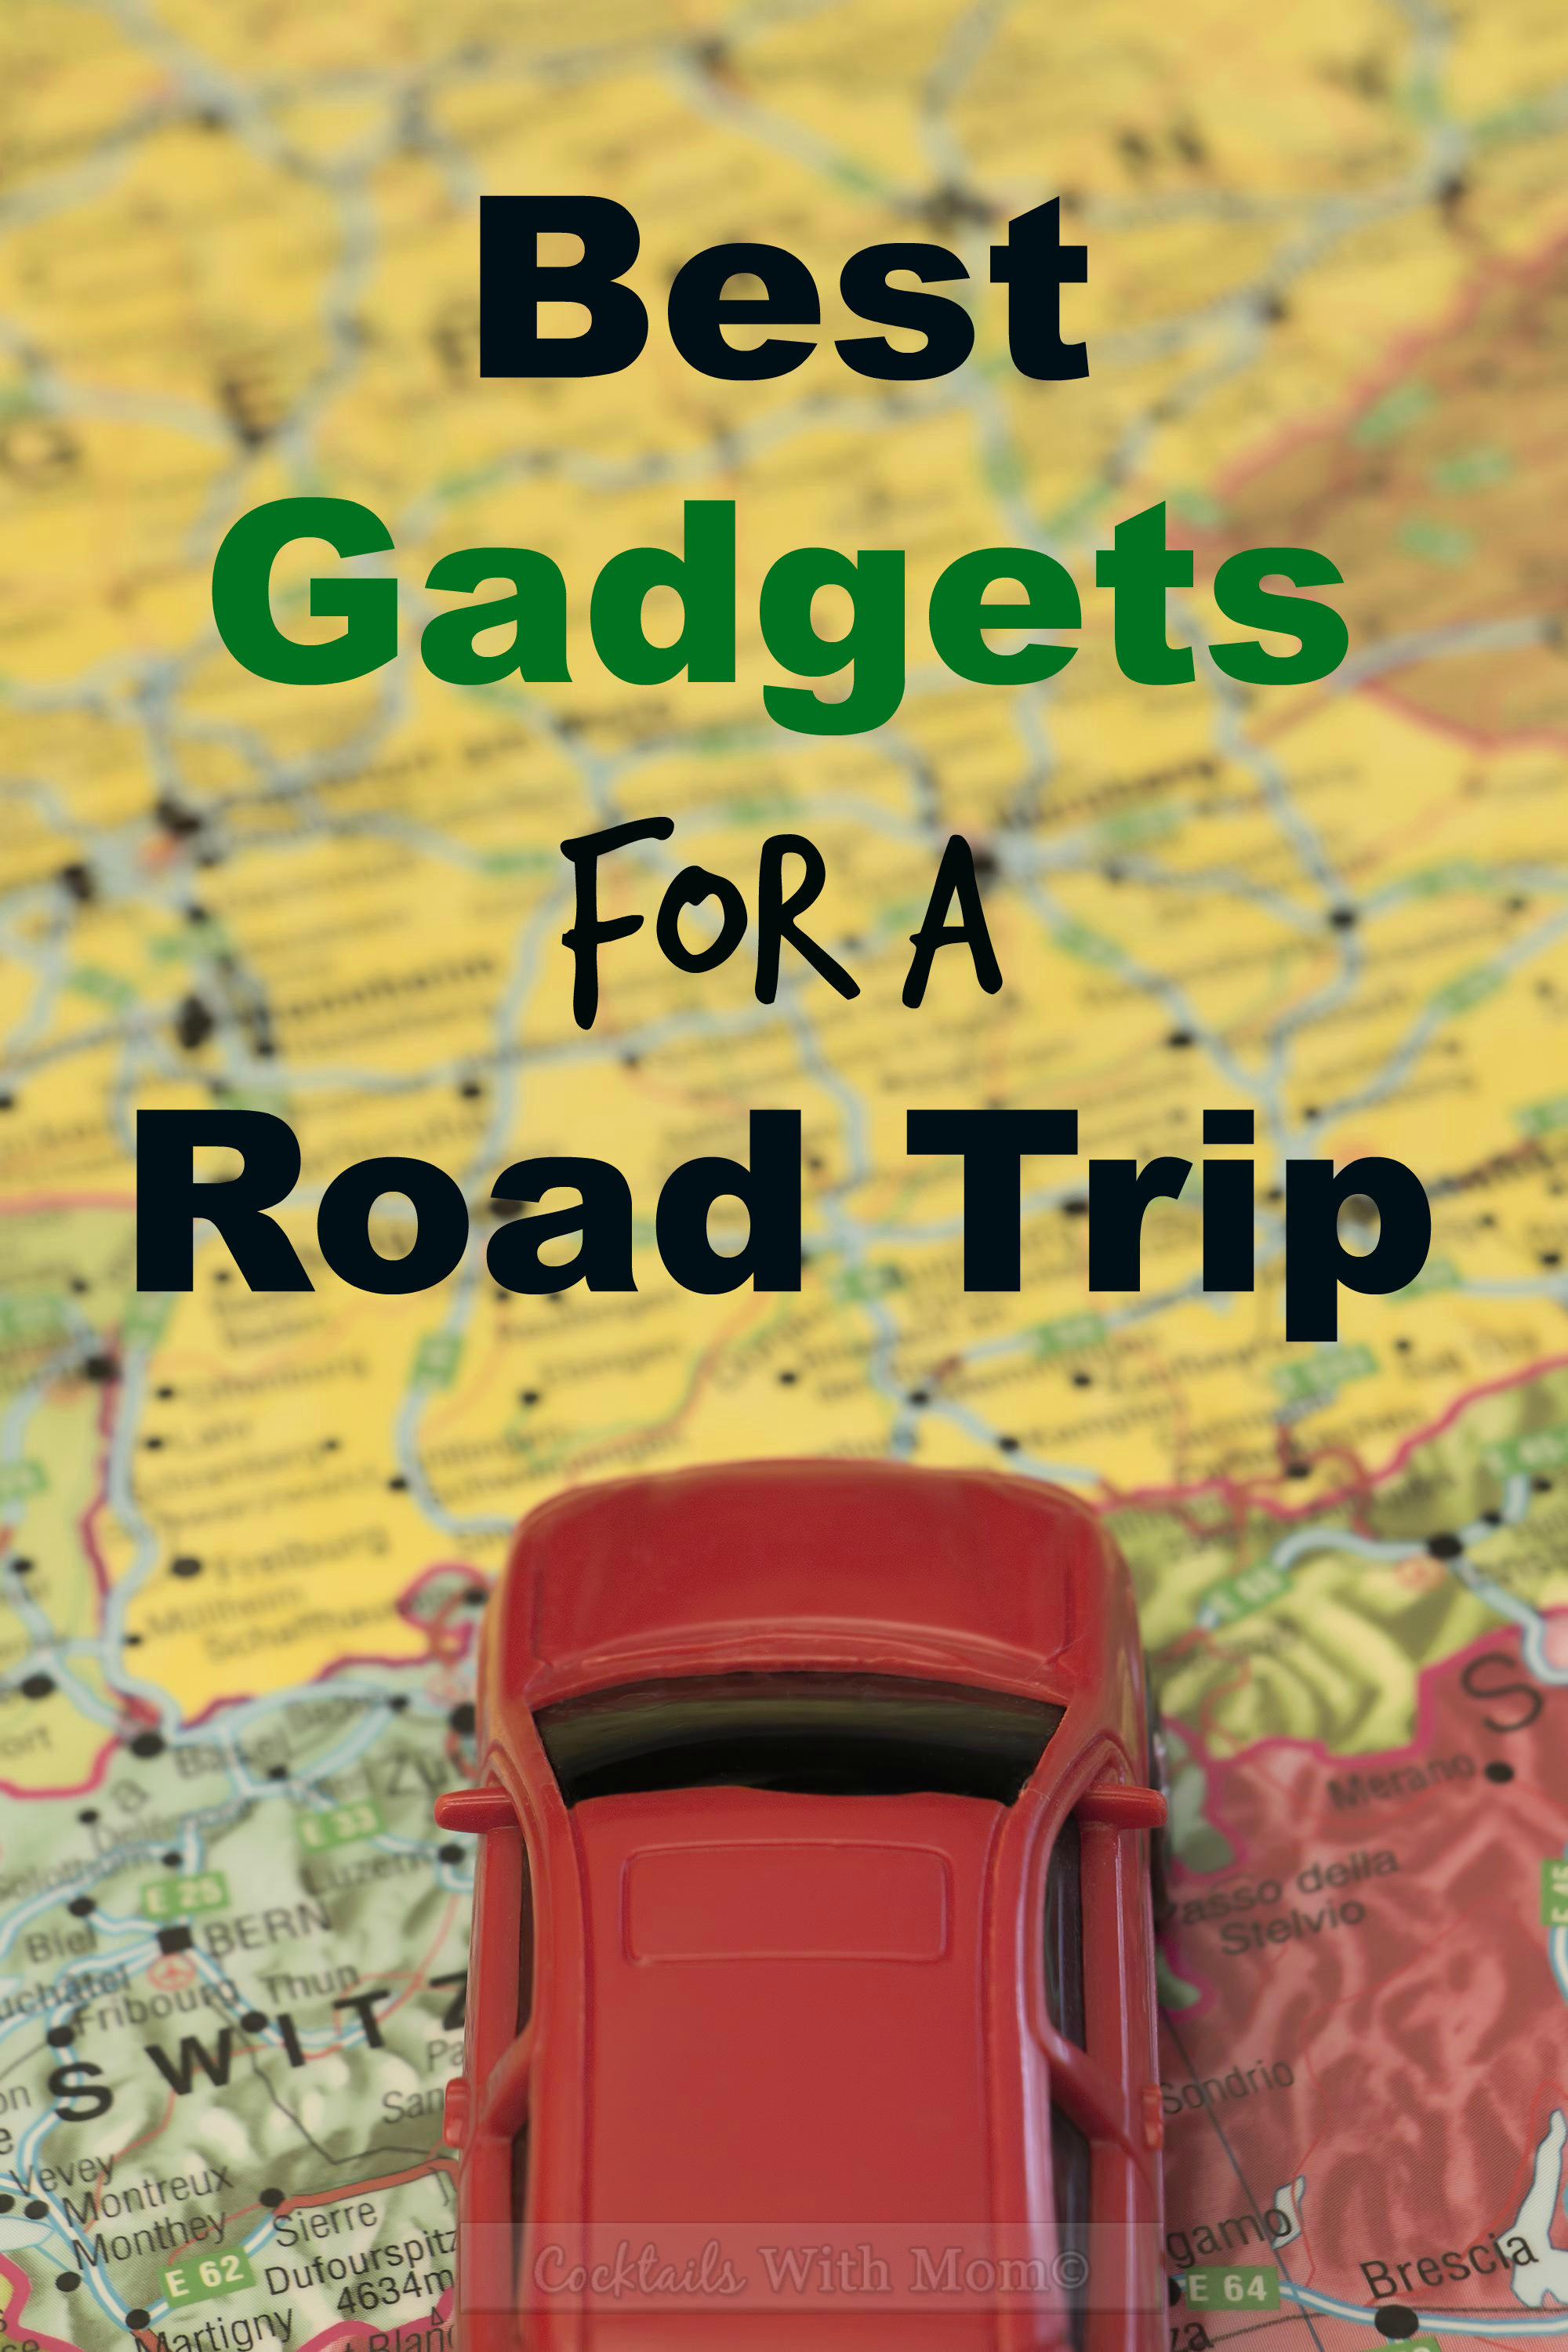 Best Gadgets for a Road Trip